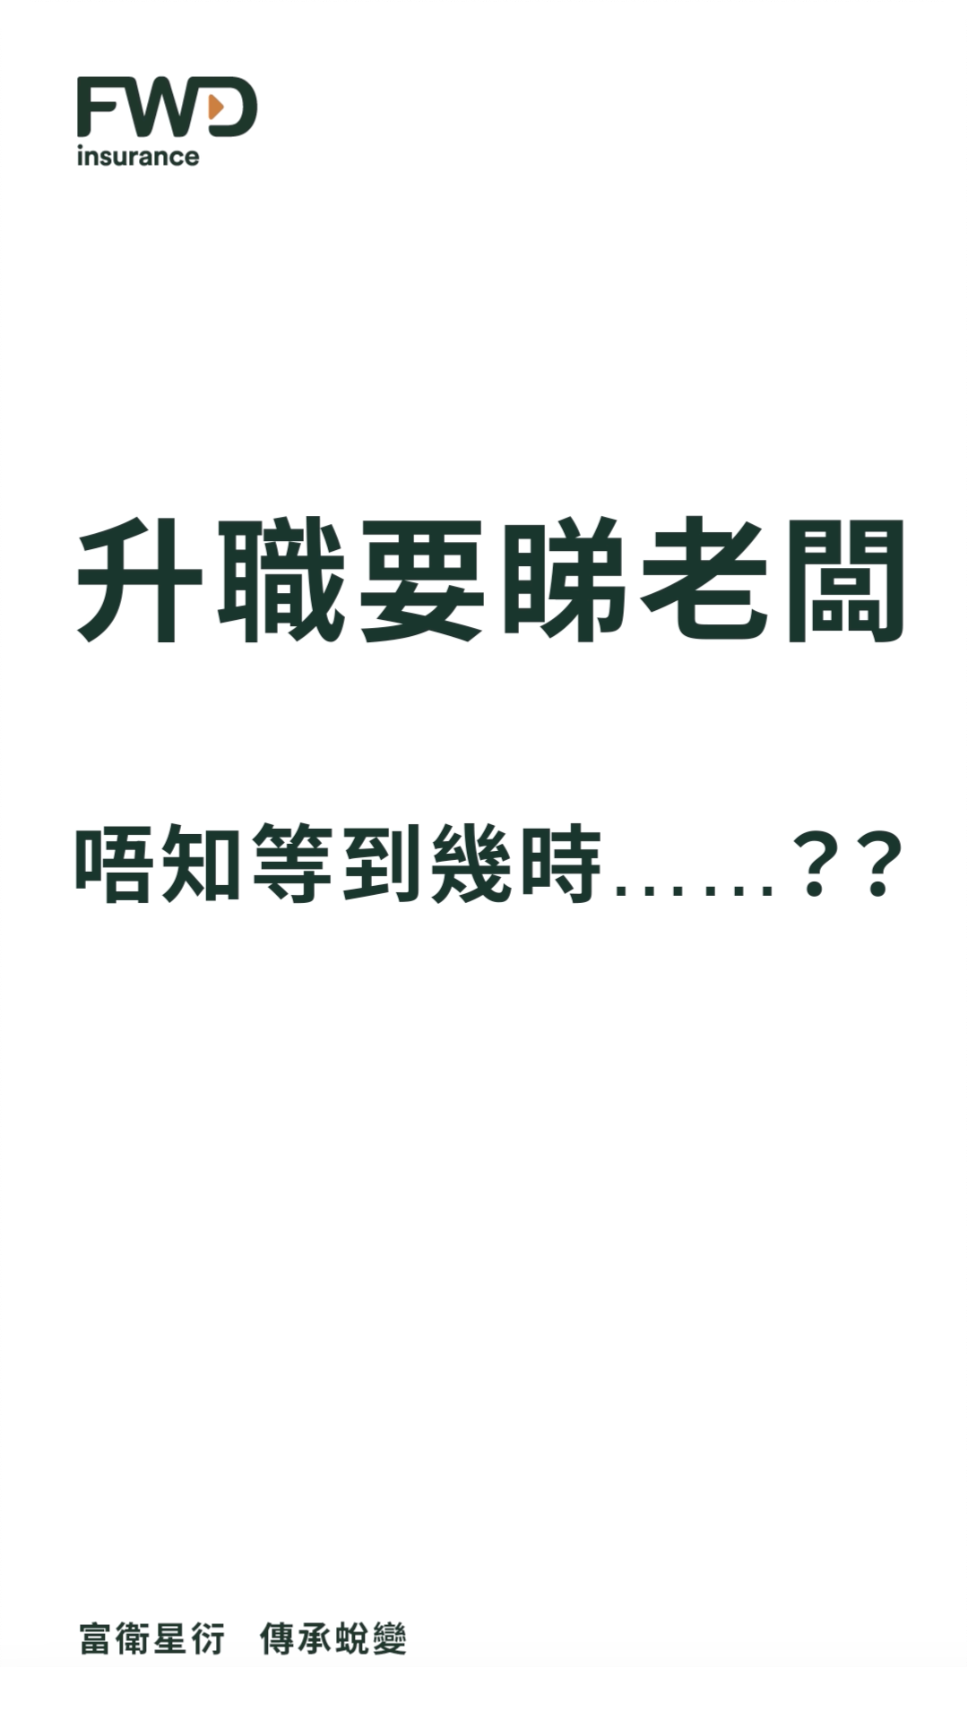 question3.png